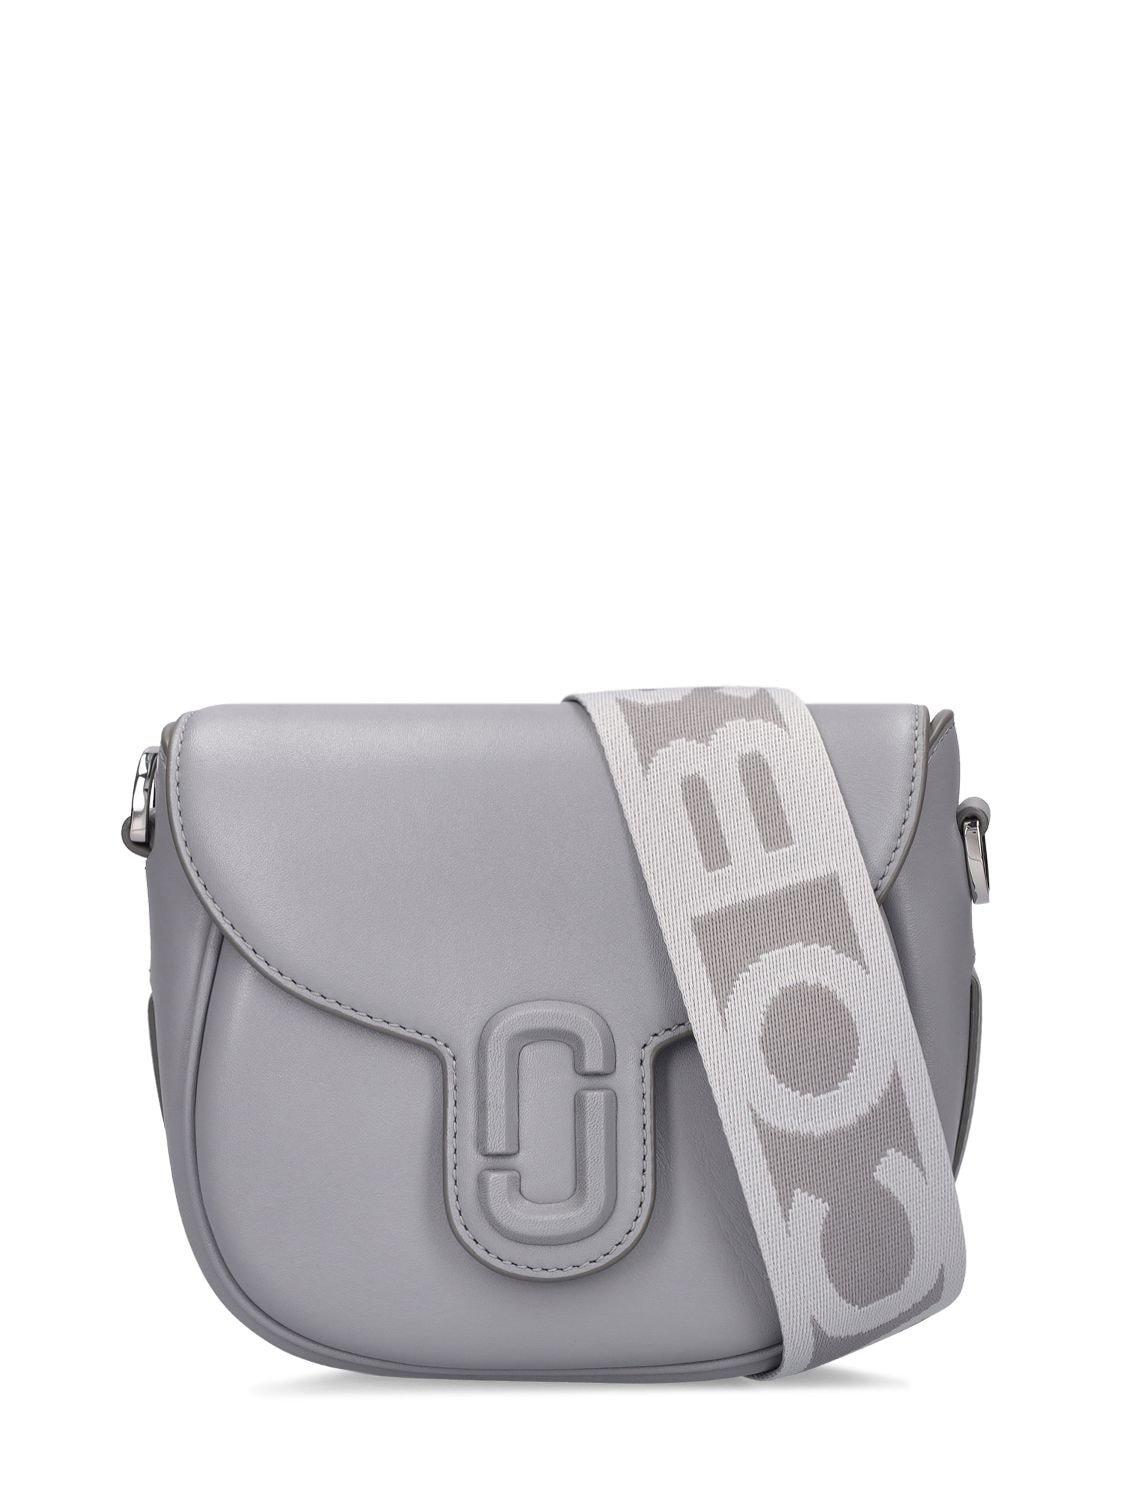 Marc Jacobs The Small Covered J Marc Saddle Bag In Wolf Gray/silver